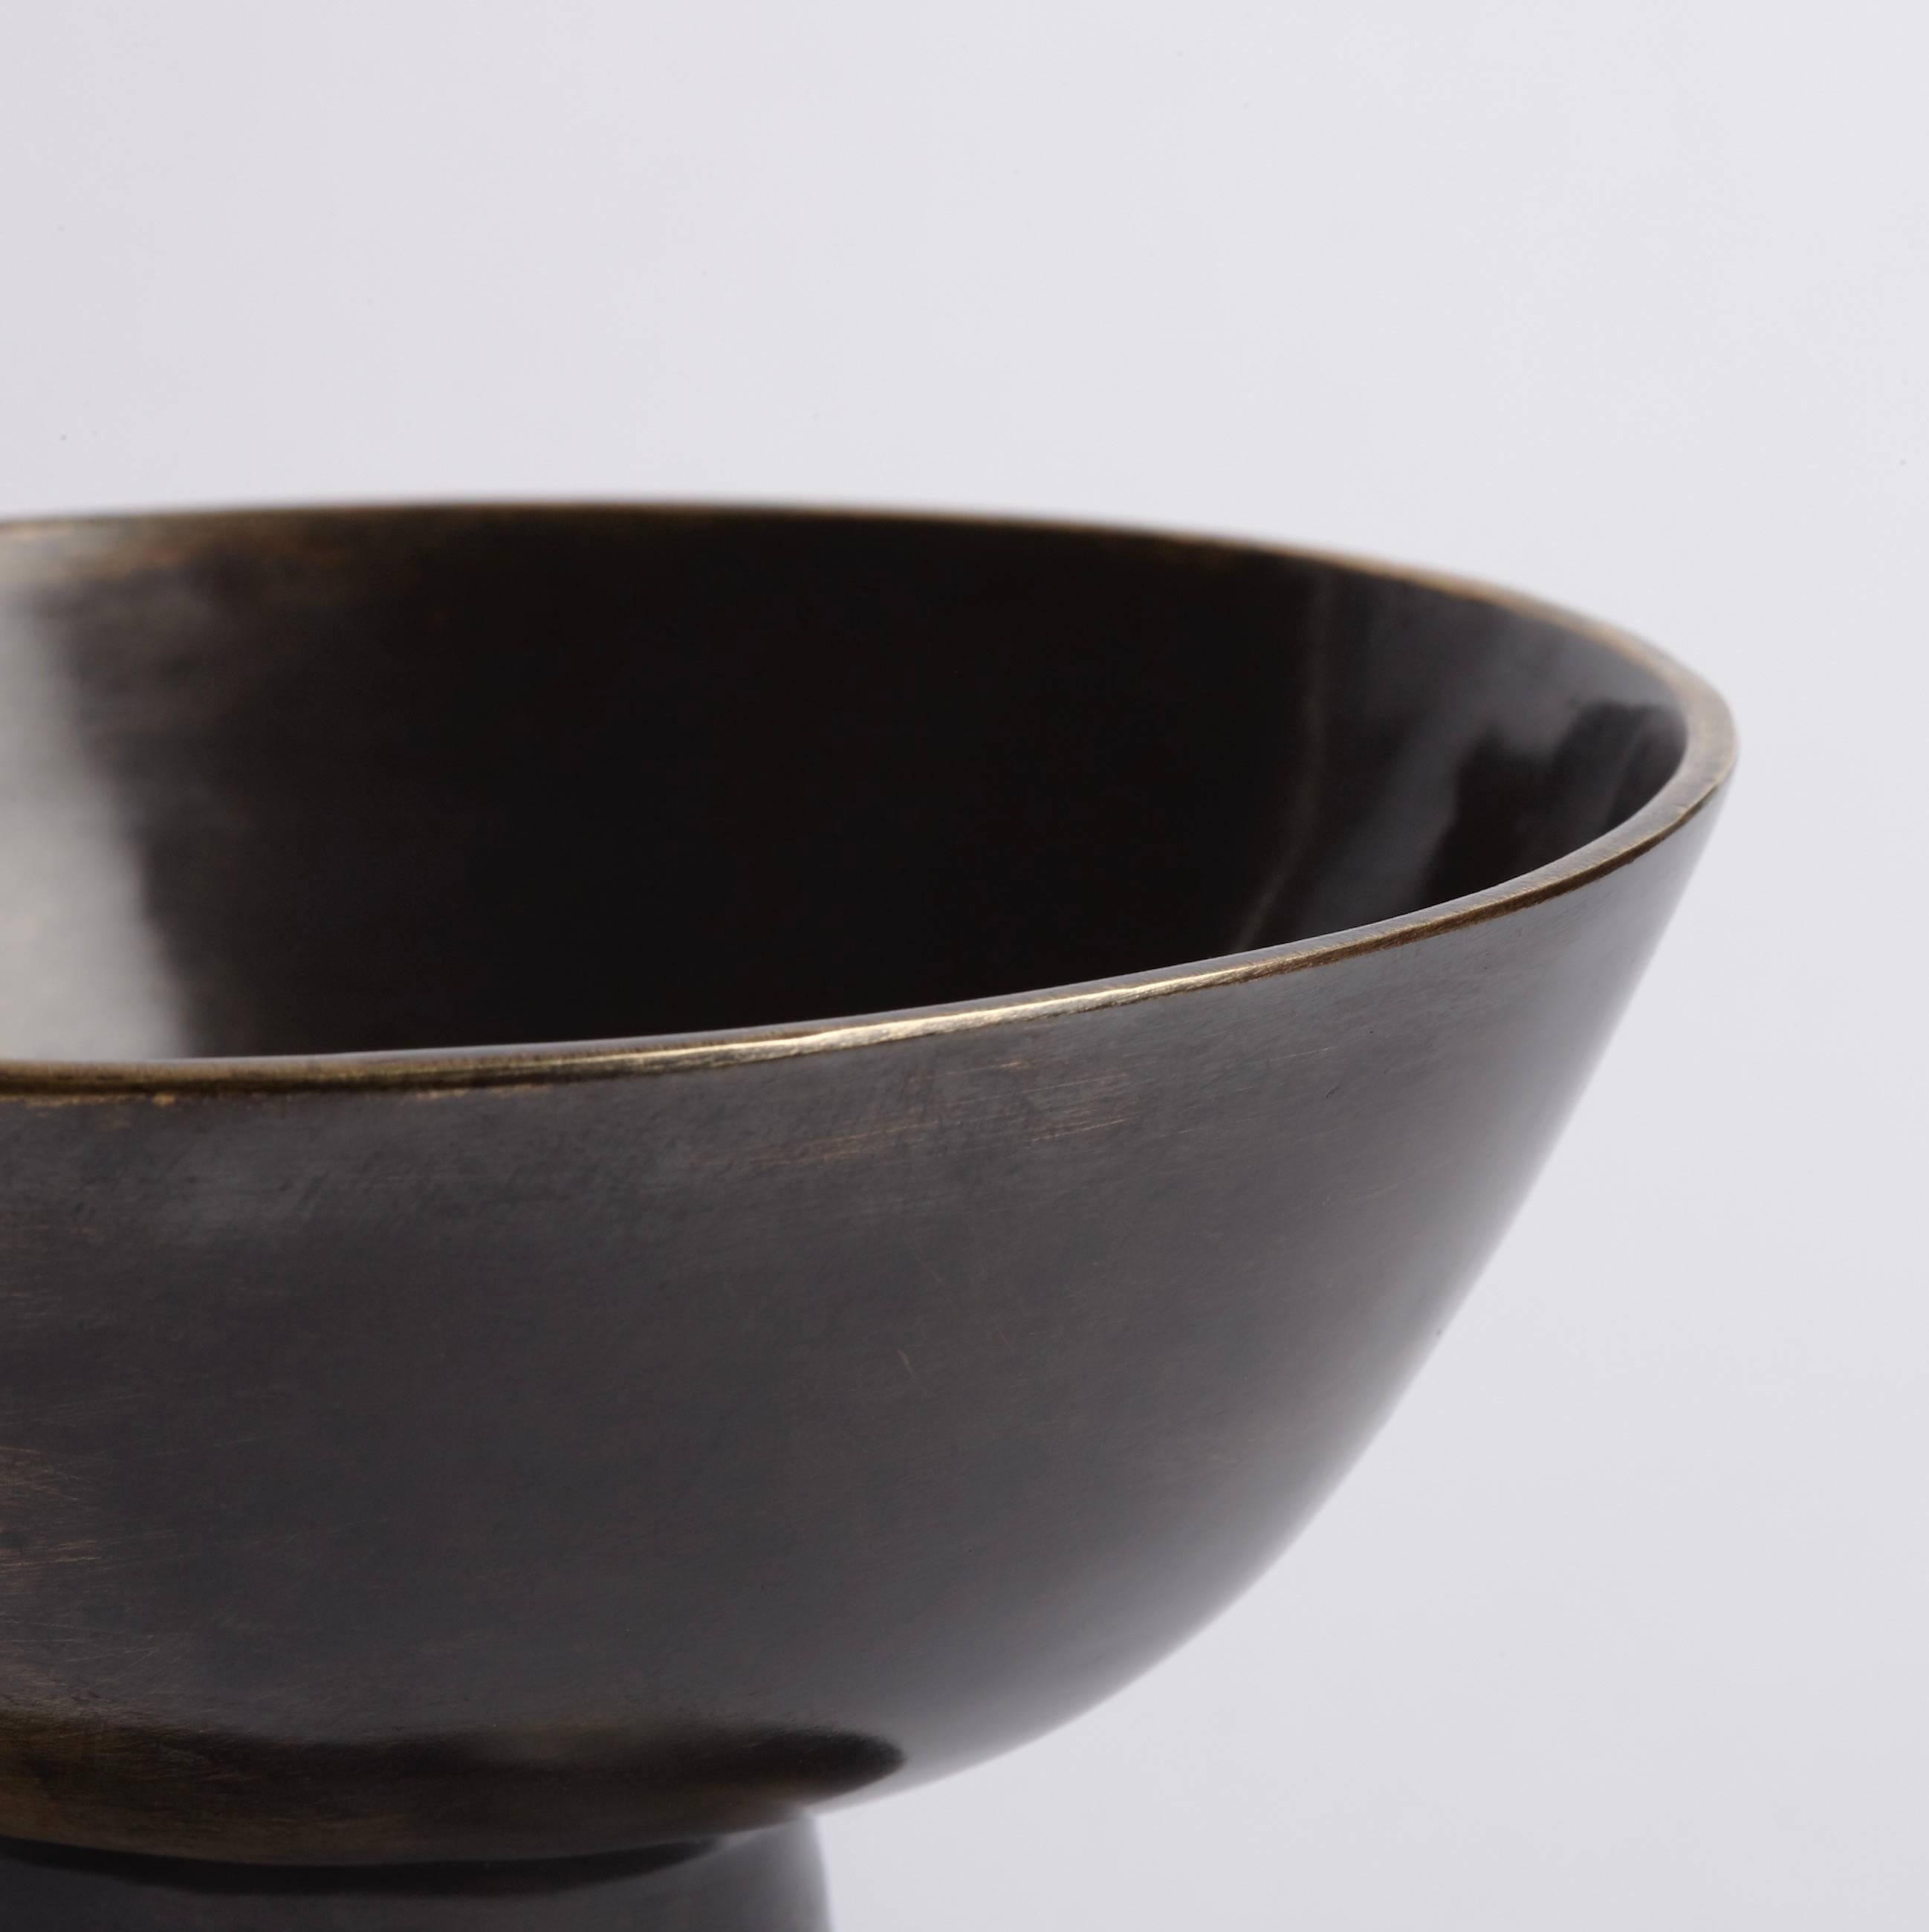 American Minimal Cast Bronze Decorative Bowl - Limited Edition by Aguirre Design